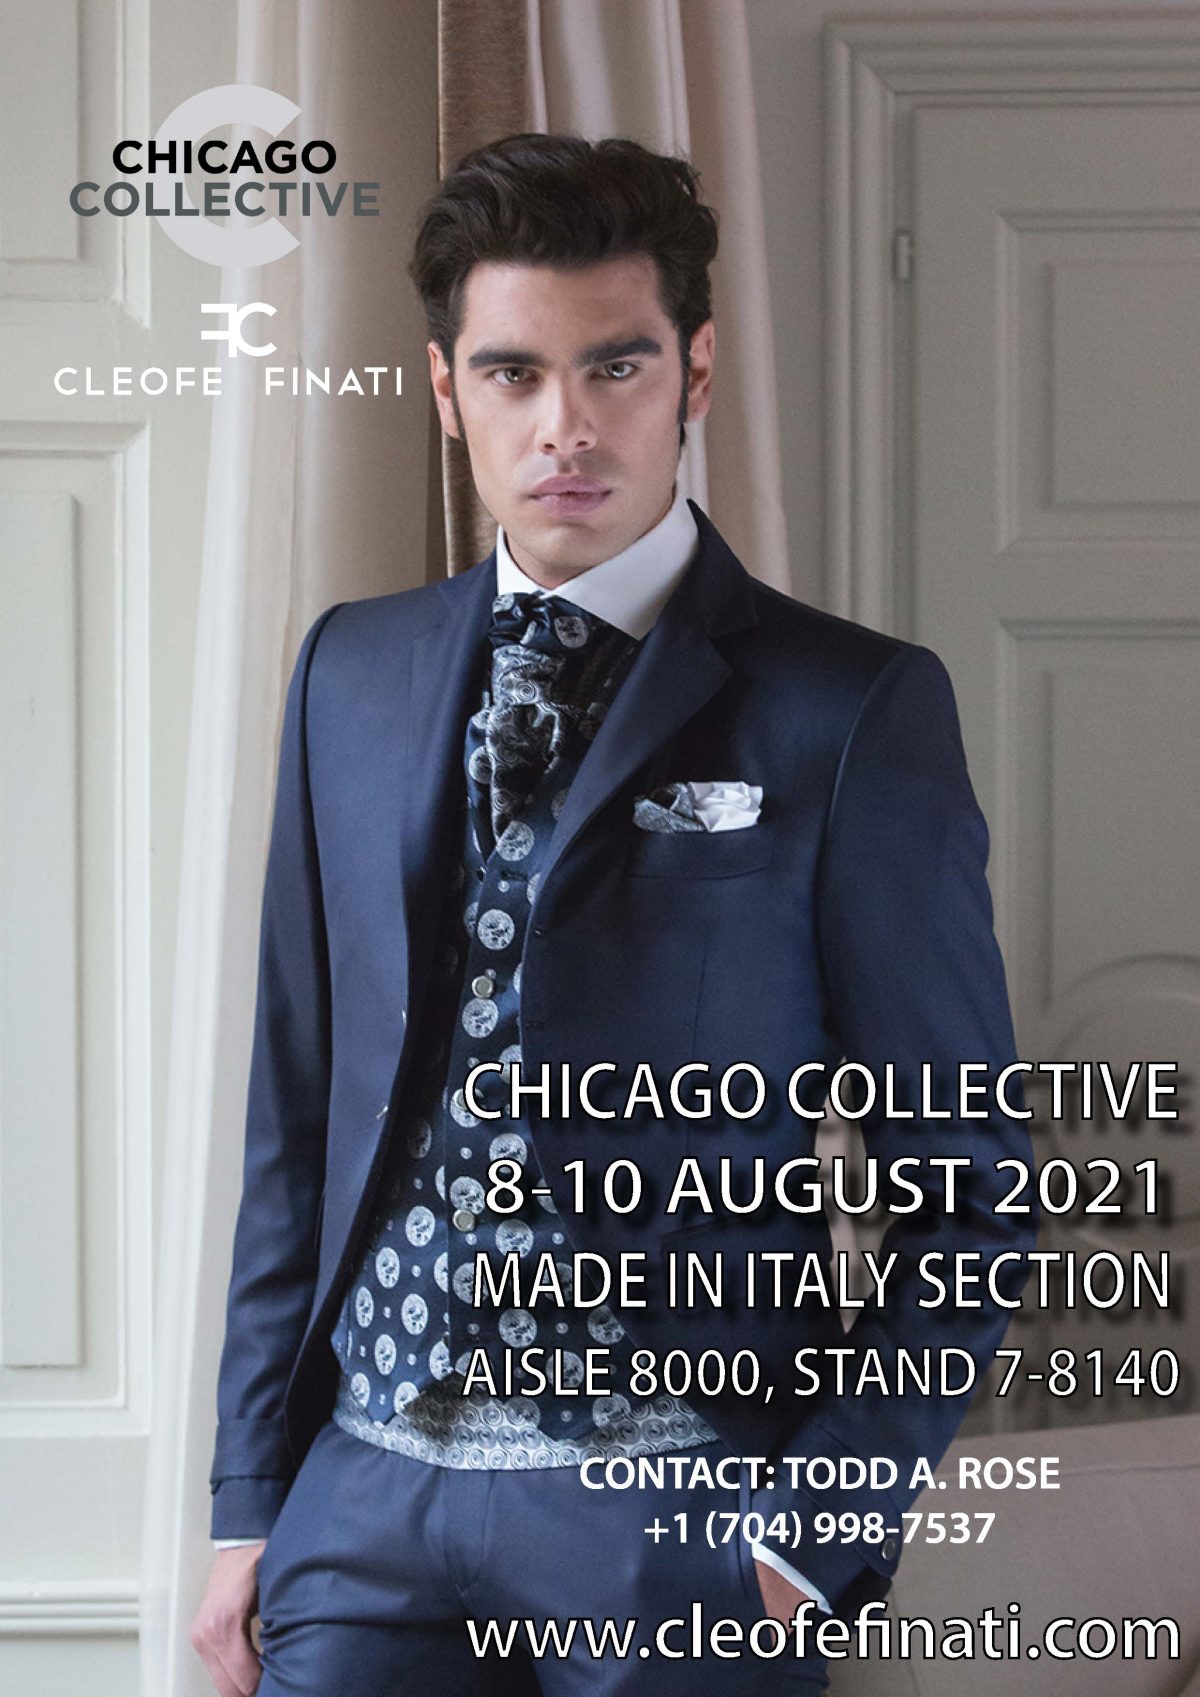 CHICAGO COLLECTIVE 8-10 AUGUST 2021